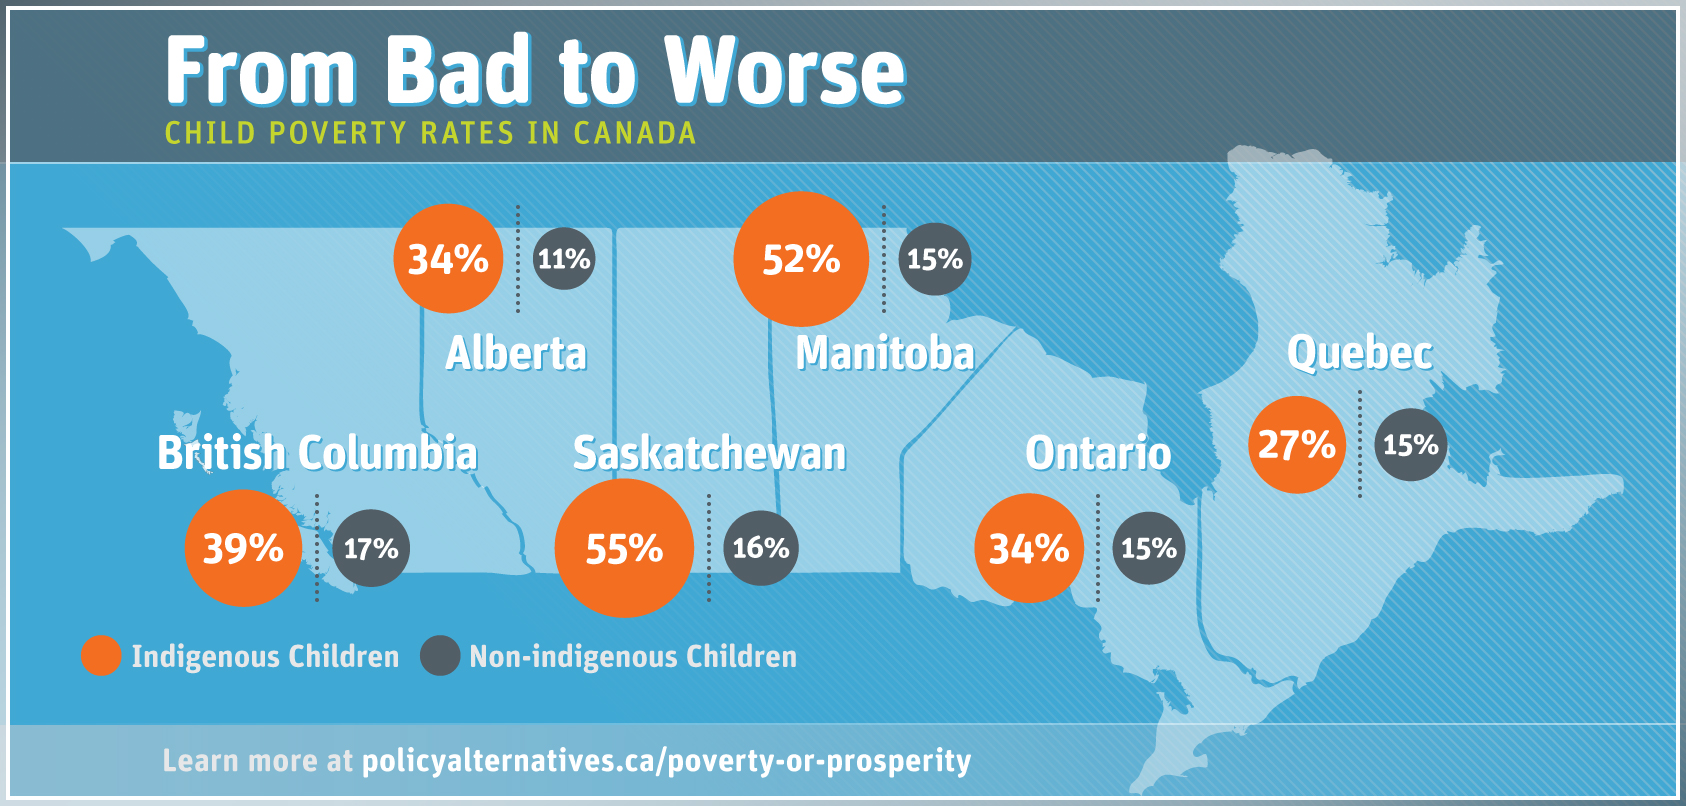 From Bad to Worse: Children Poverty Rates in Canada